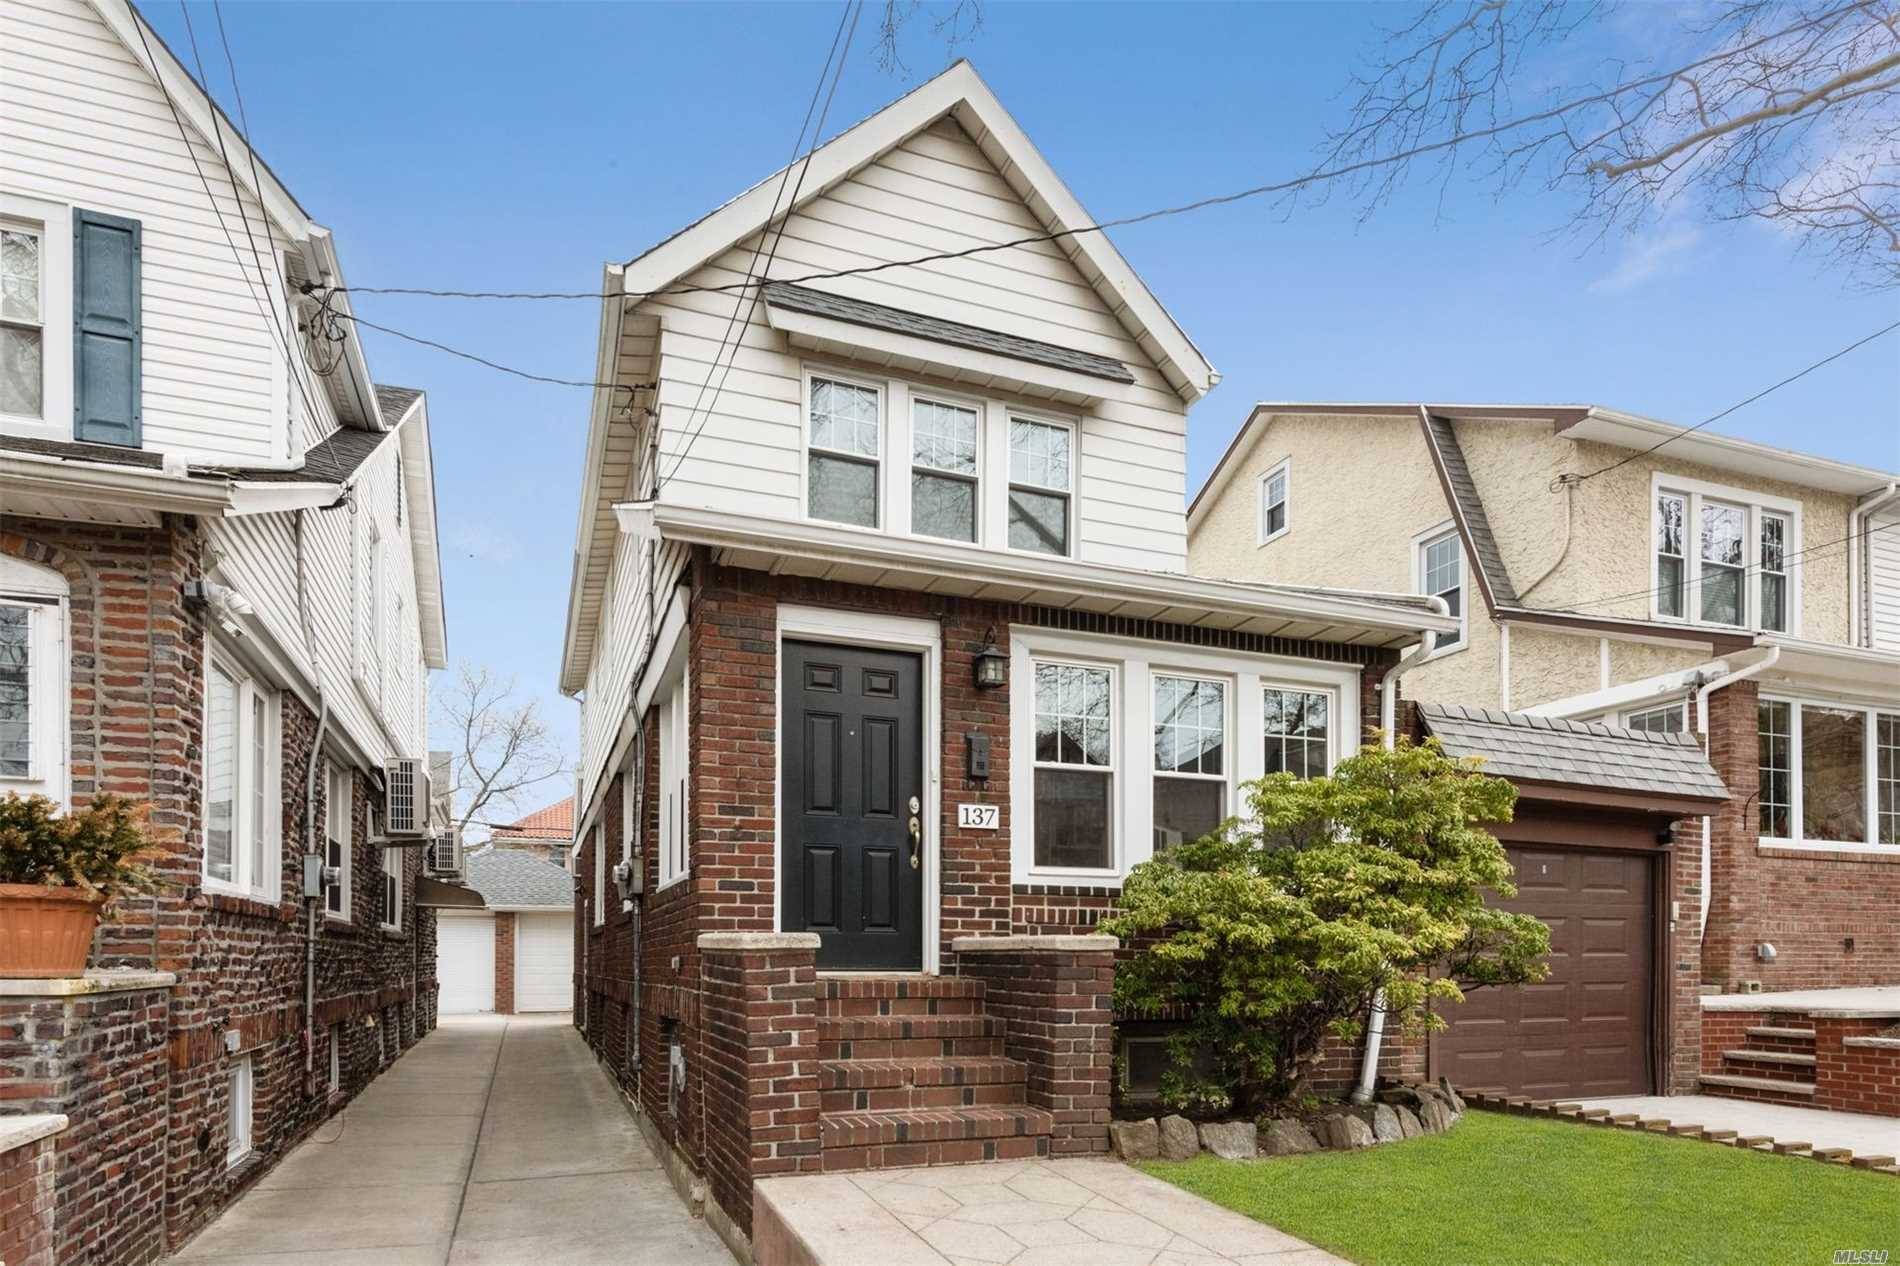 Beautiful Sun Filled, Renovated, Detached Colonial on Tree Lined Street in Desirable Section of Bay Ridge.